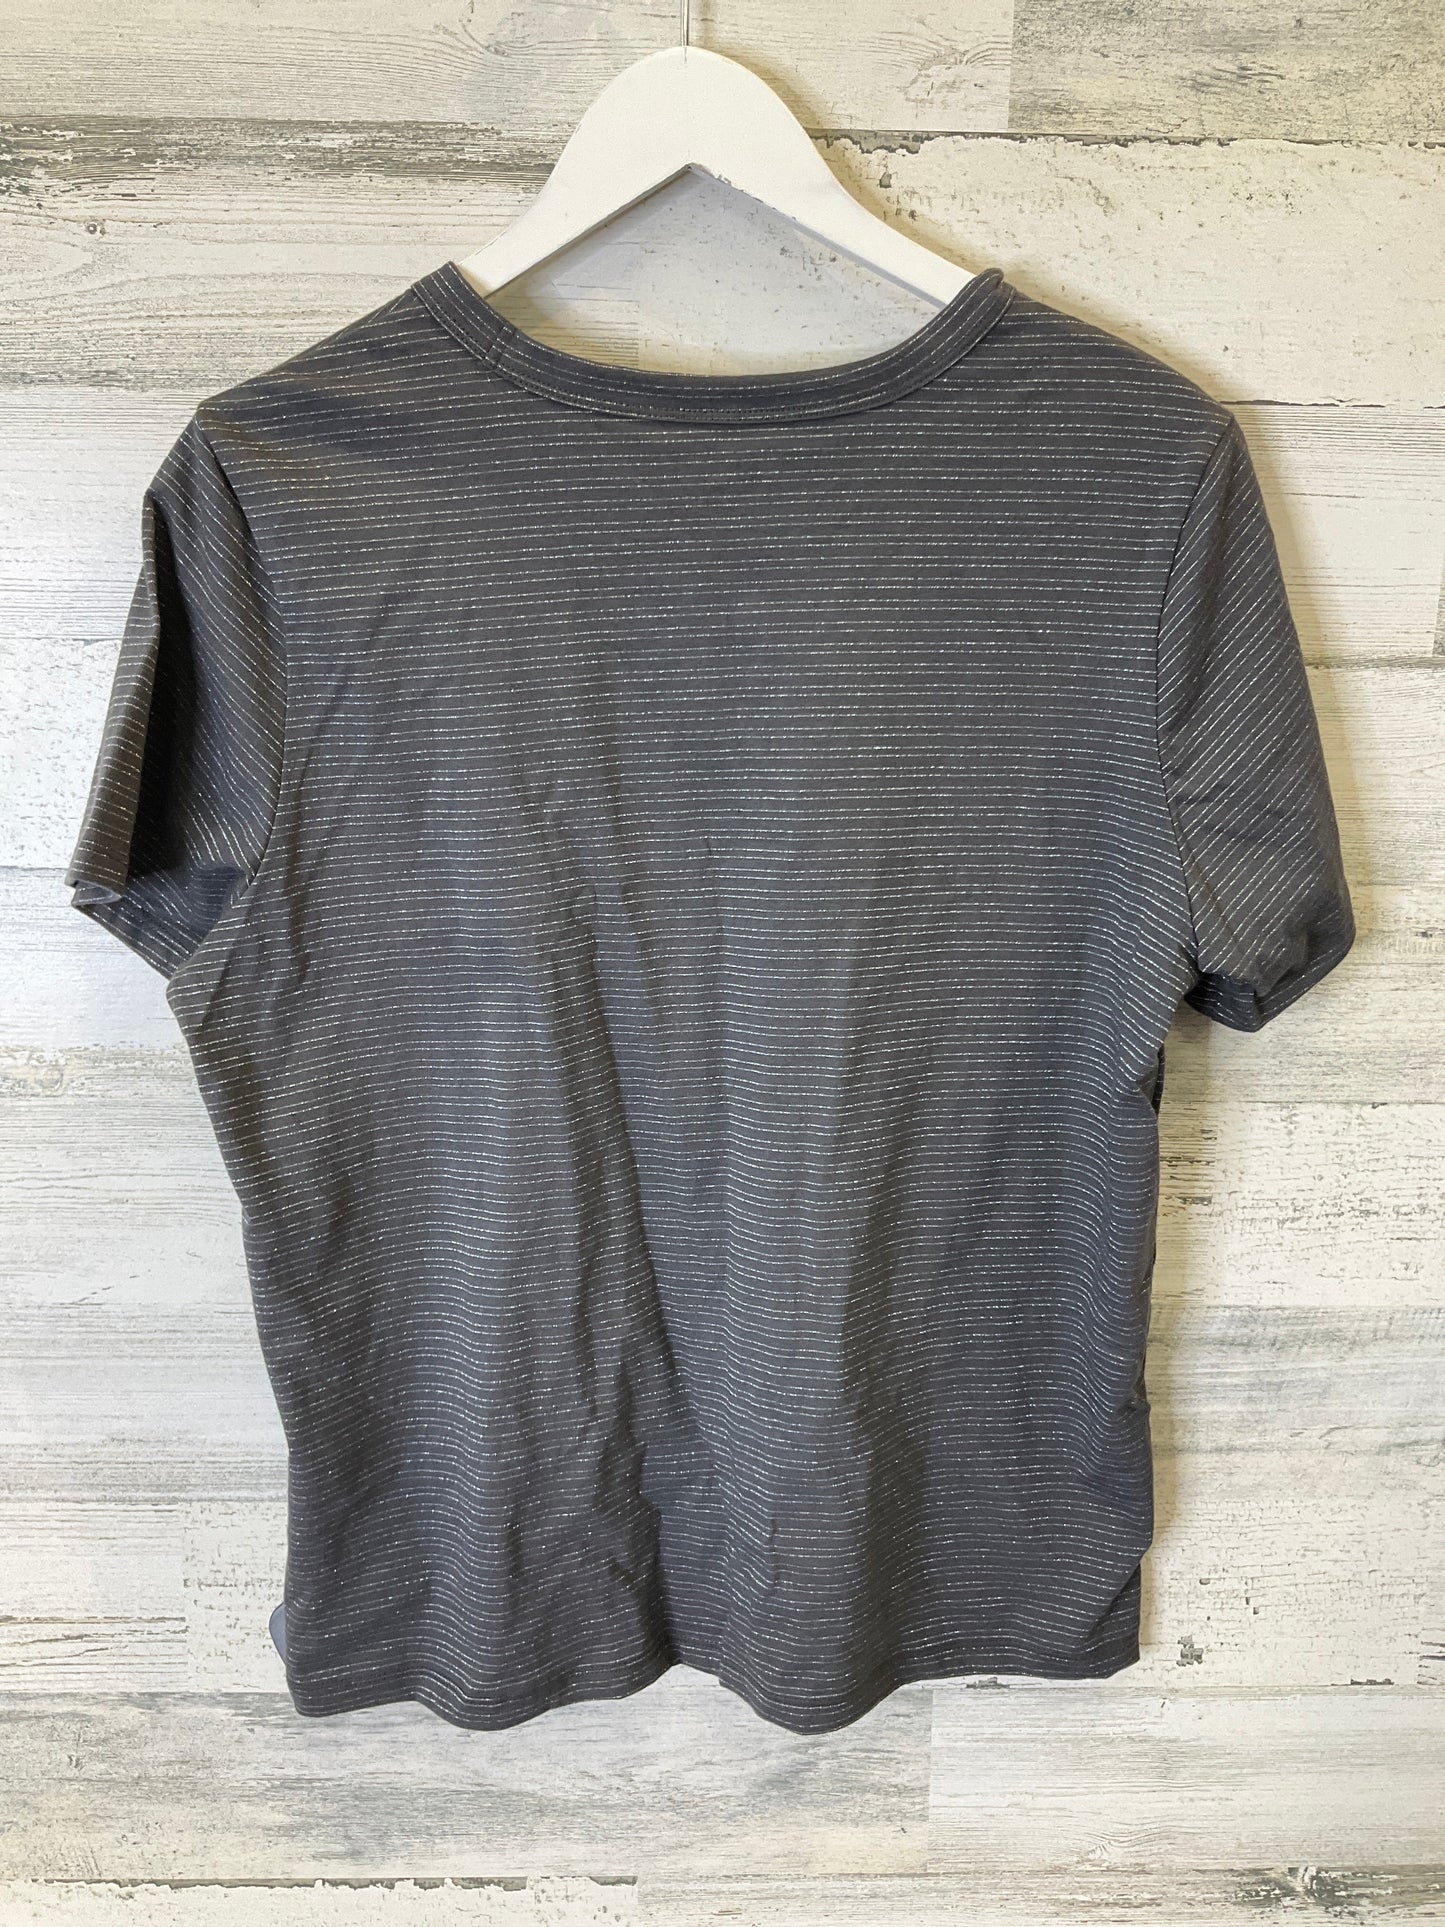 Grey Top Short Sleeve Old Navy, Size L